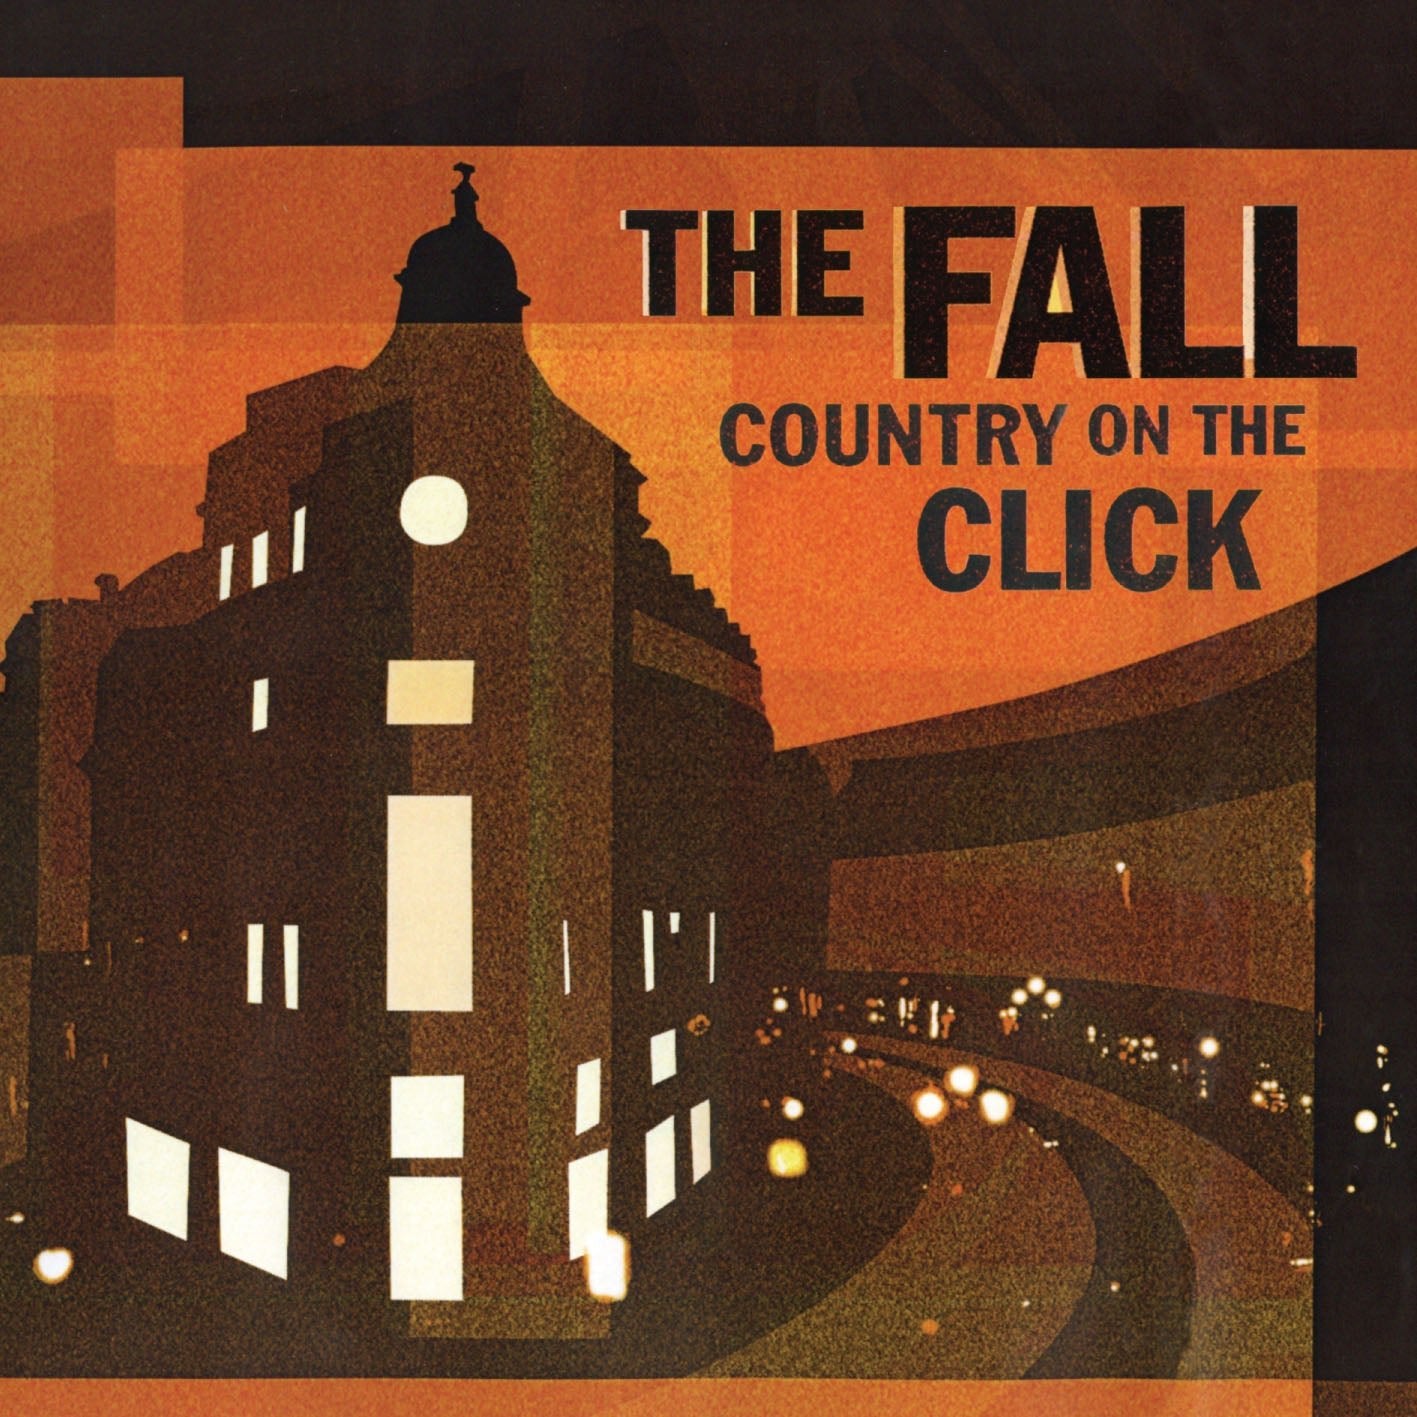 The Fall - A Country On The Click (Alternative Version) - 33RPM